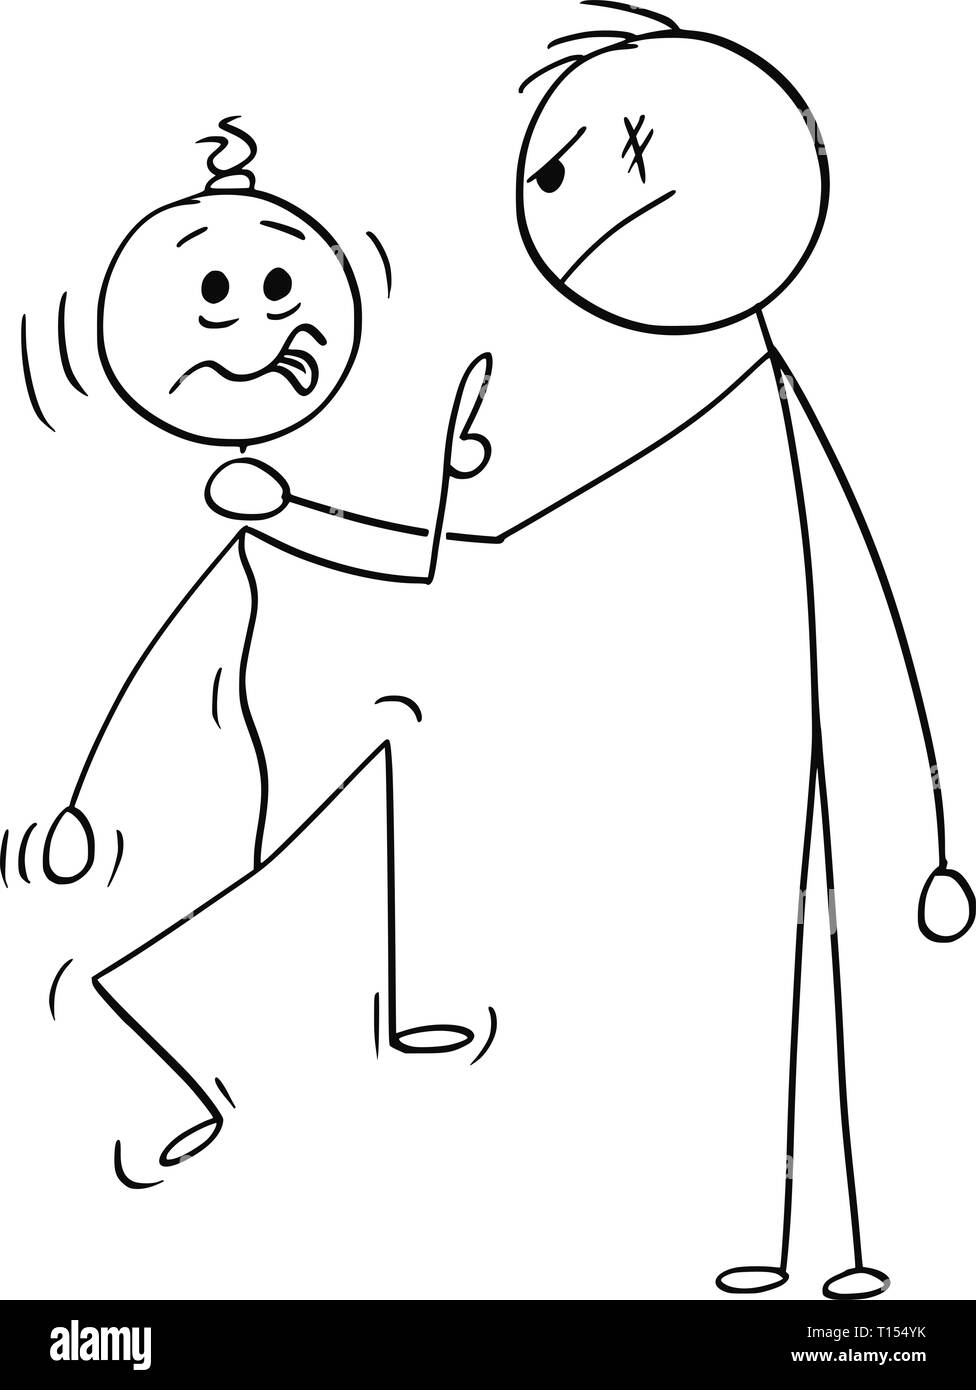 Cartoon stick figure drawing conceptual illustration of big and strong man holding smaller and weaker man's neck and strangling him and holding him in the air. Stock Vector